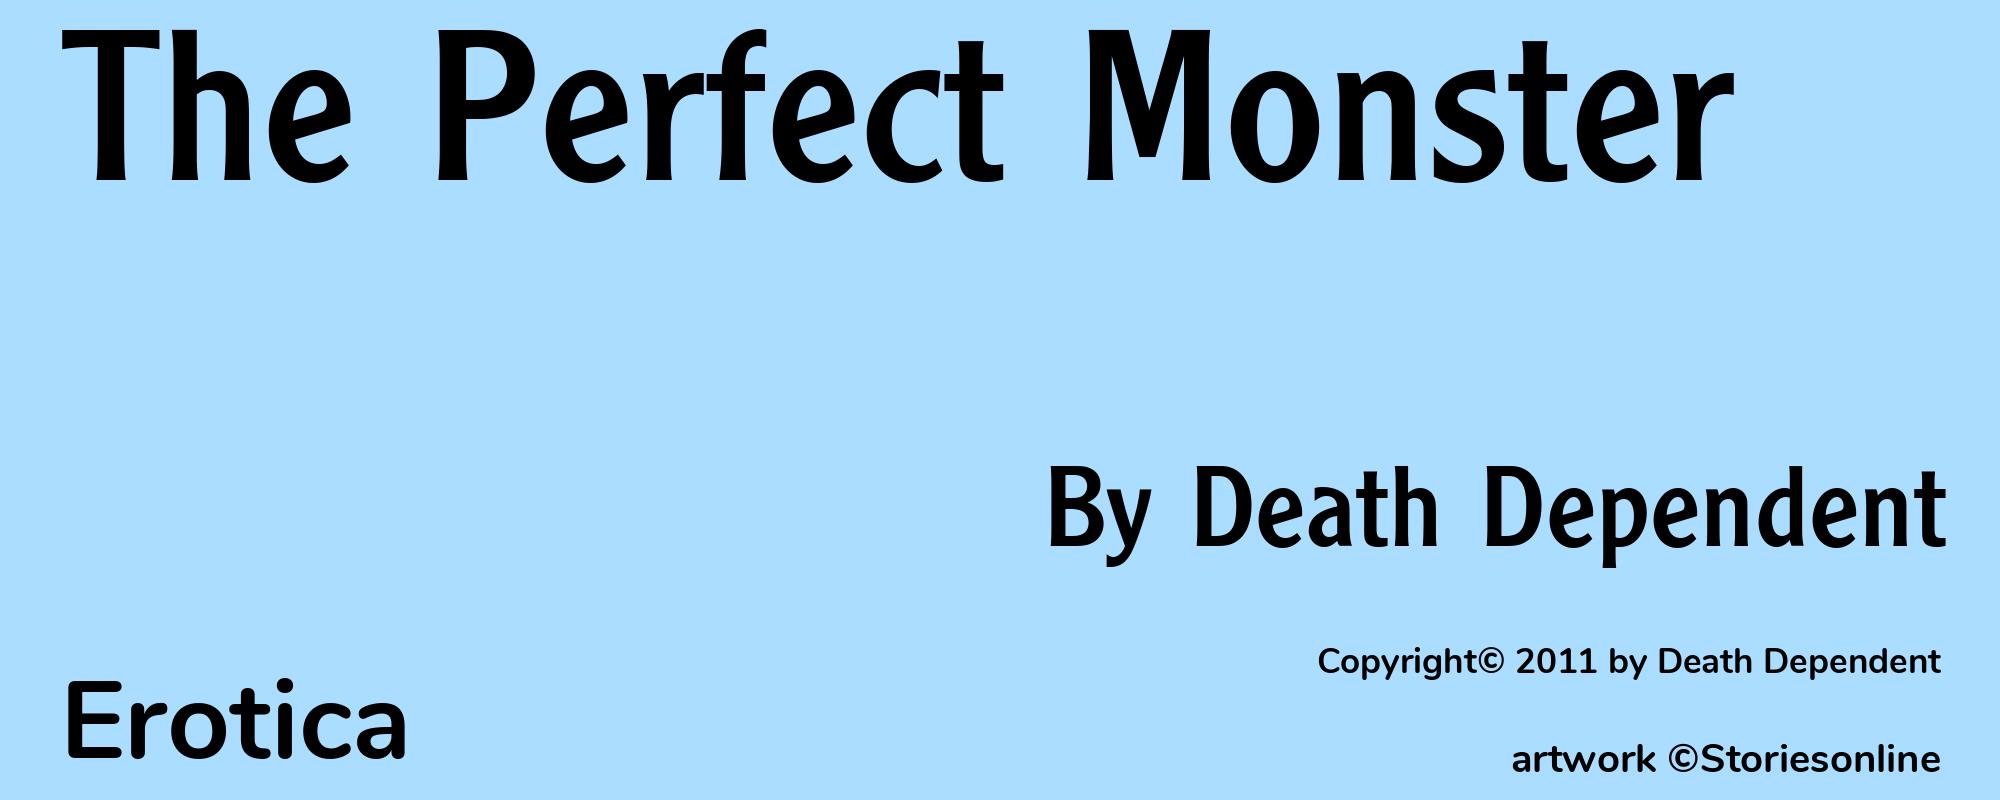 The Perfect Monster - Cover